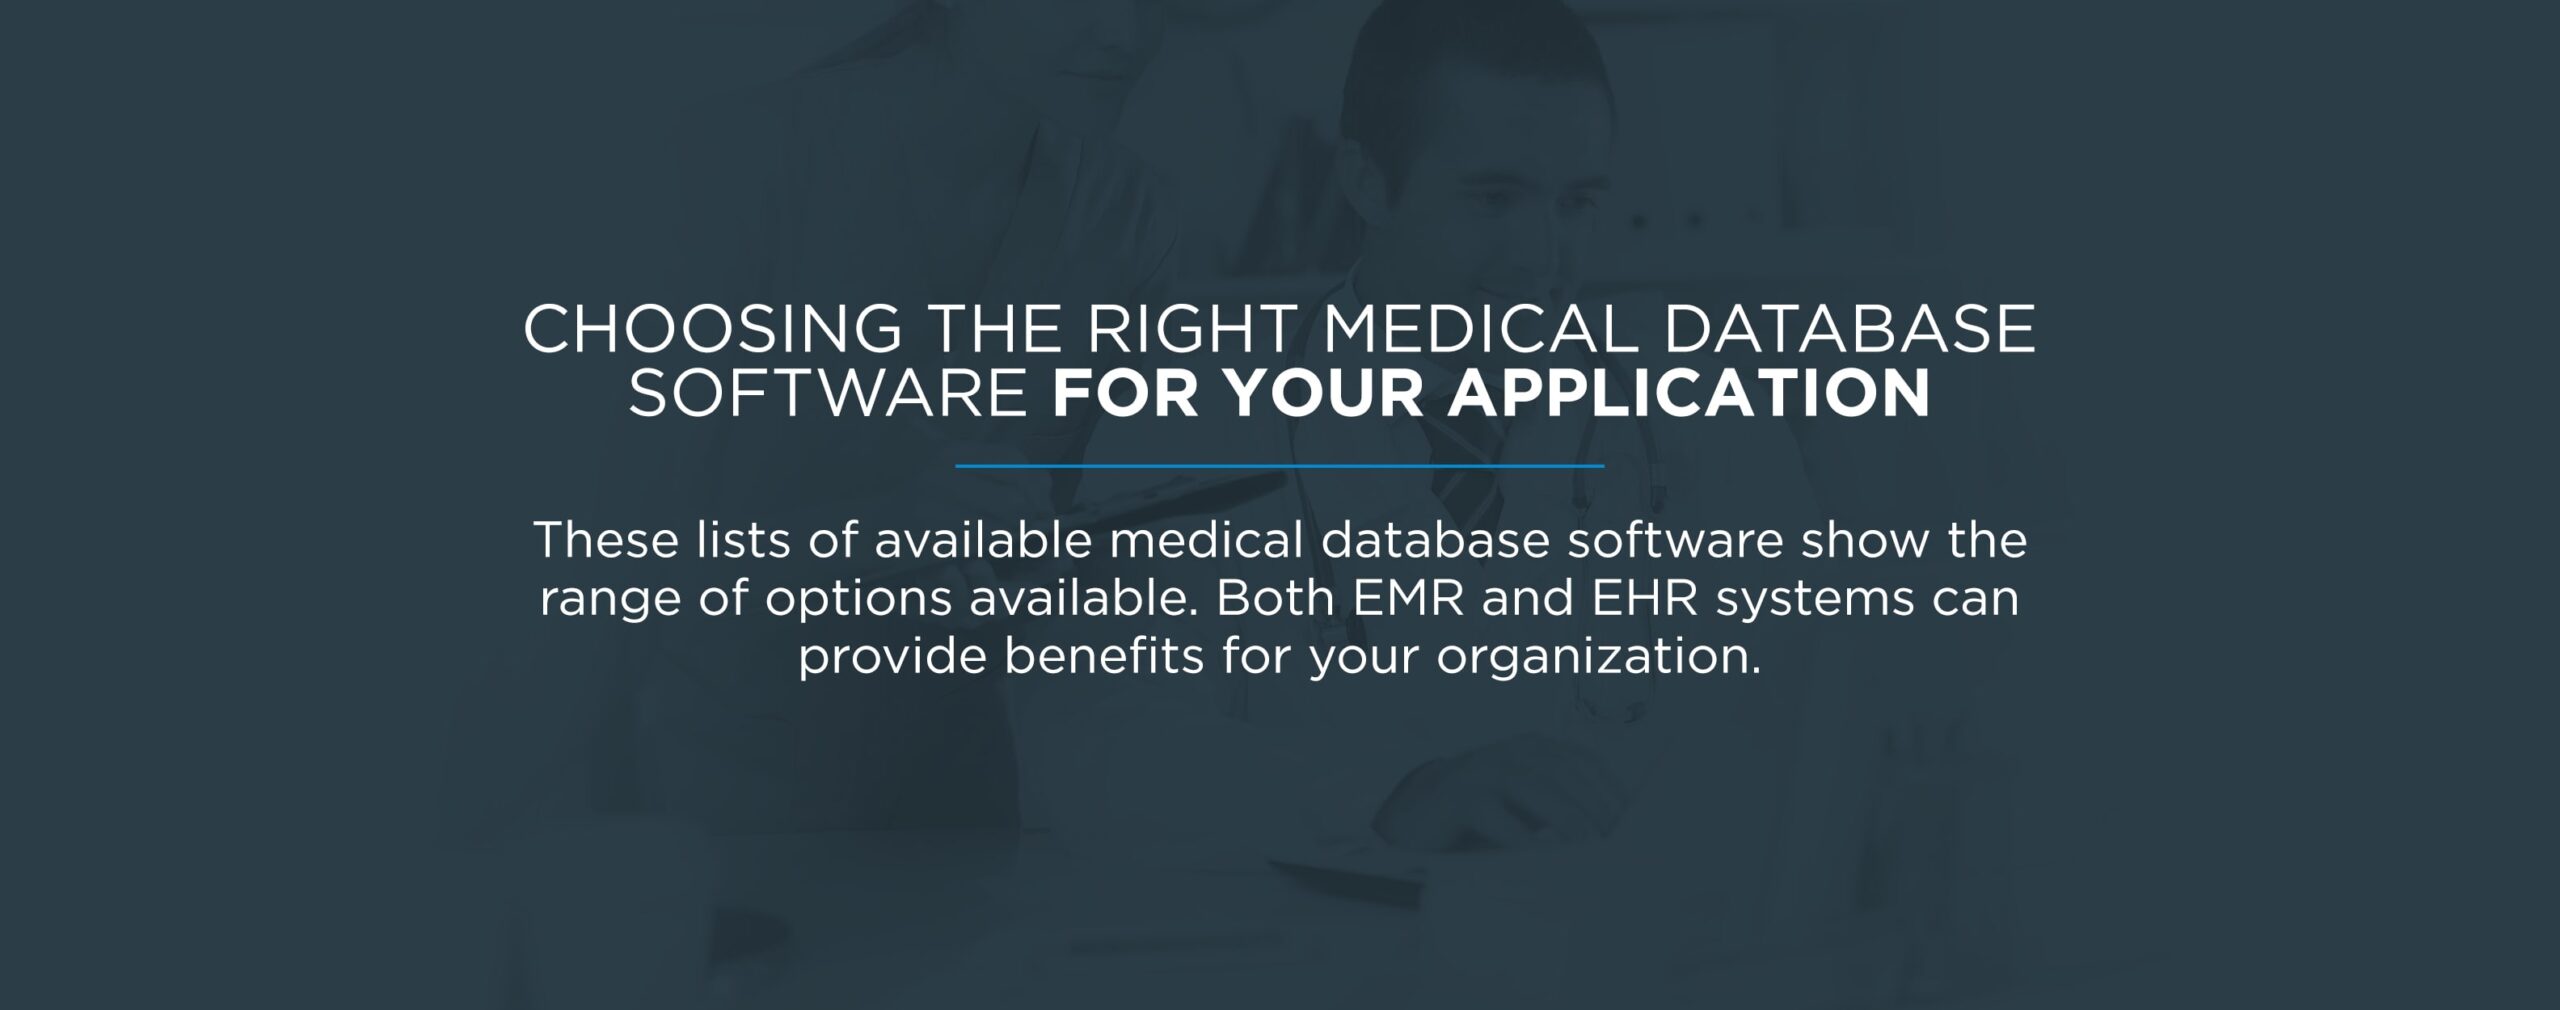 Choosing the Right Medical Database Software for Your Application